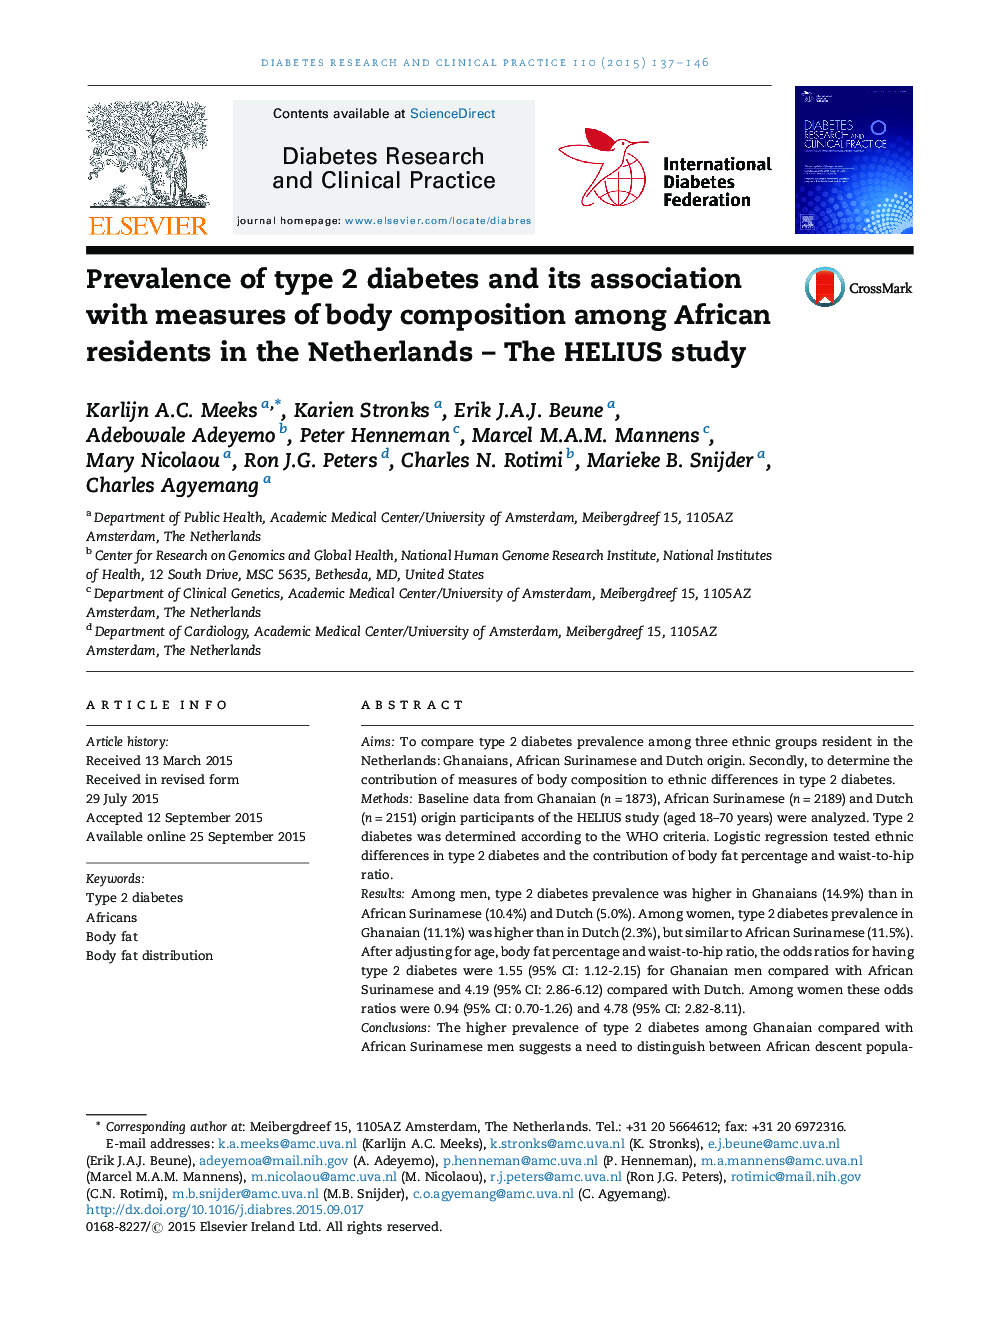 Prevalence of type 2 diabetes and its association with measures of body composition among African residents in the Netherlands – The HELIUS study